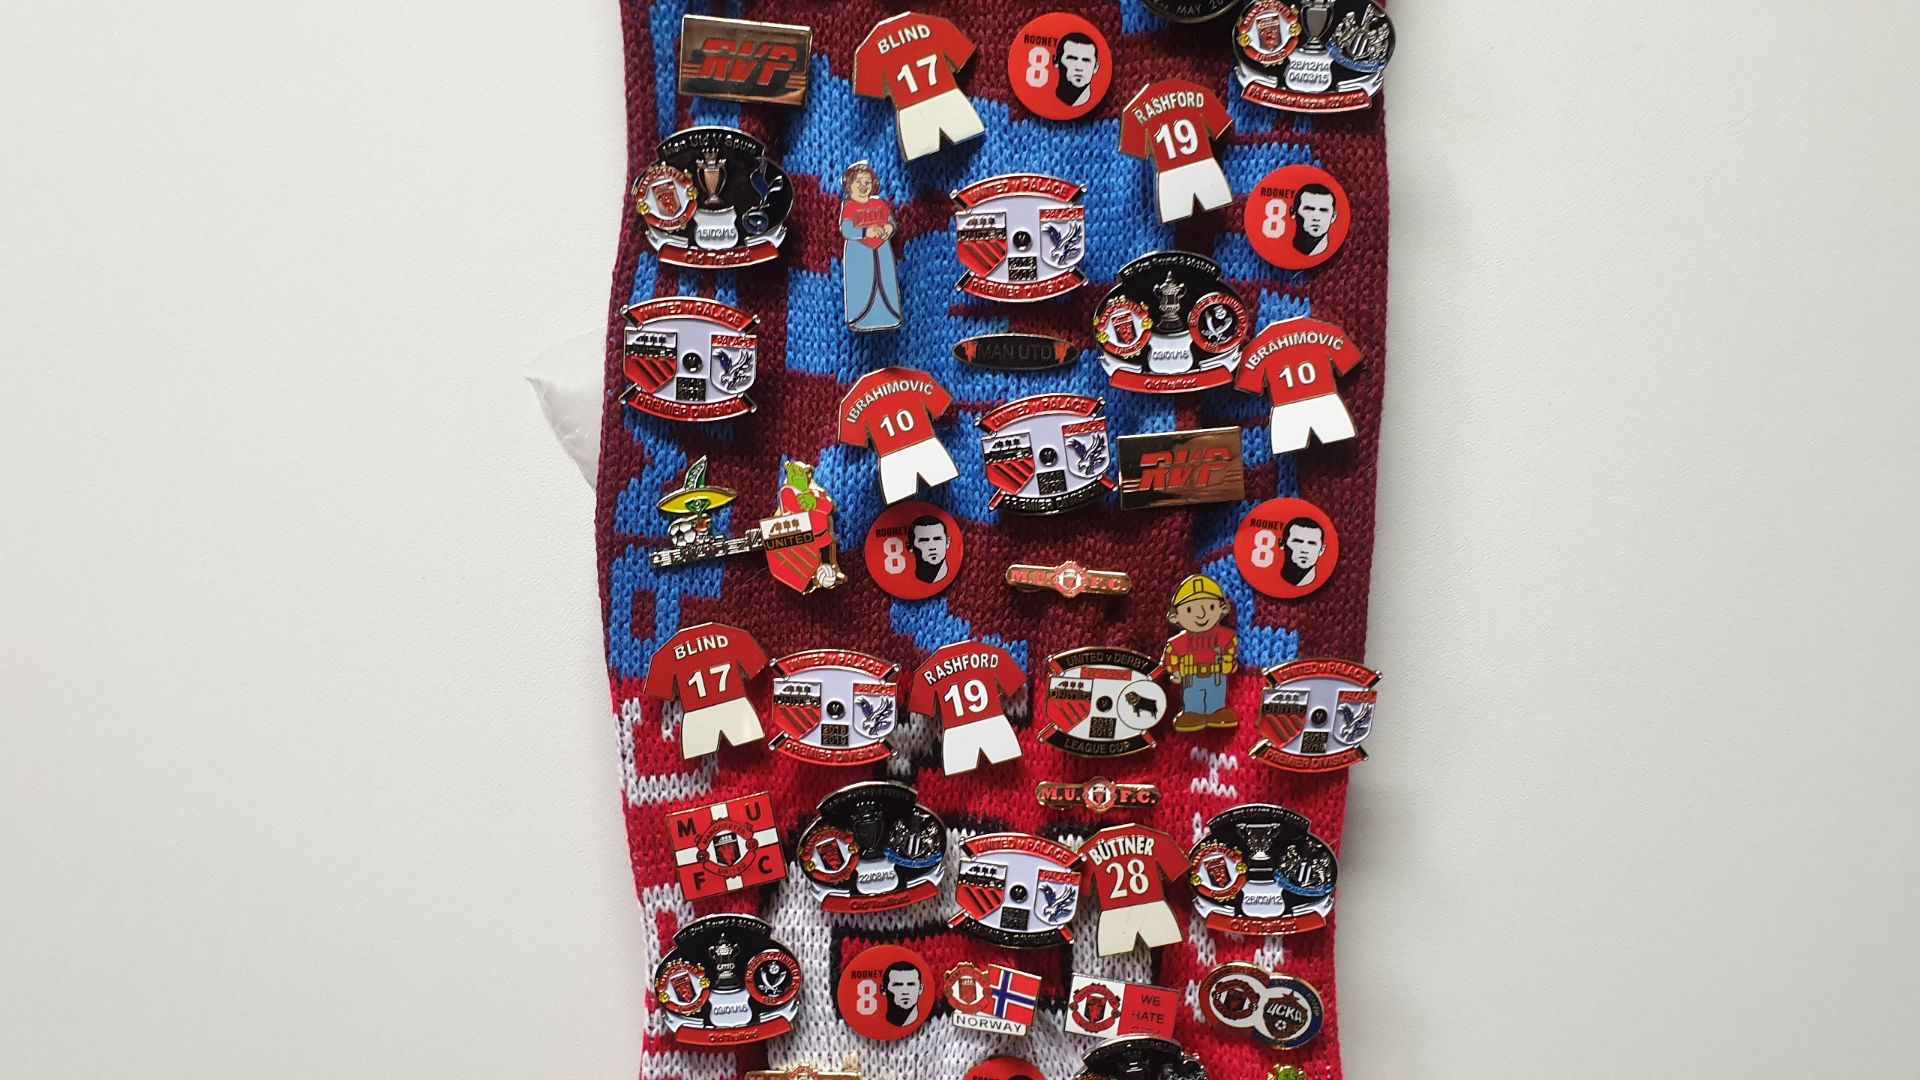 MANCHESTER UNITED SCARF CONTAINING APPROX 200 X PIN BADGES IE MUFC, BATTLE FOR MANCHESTER, ROONEY, - Image 5 of 8